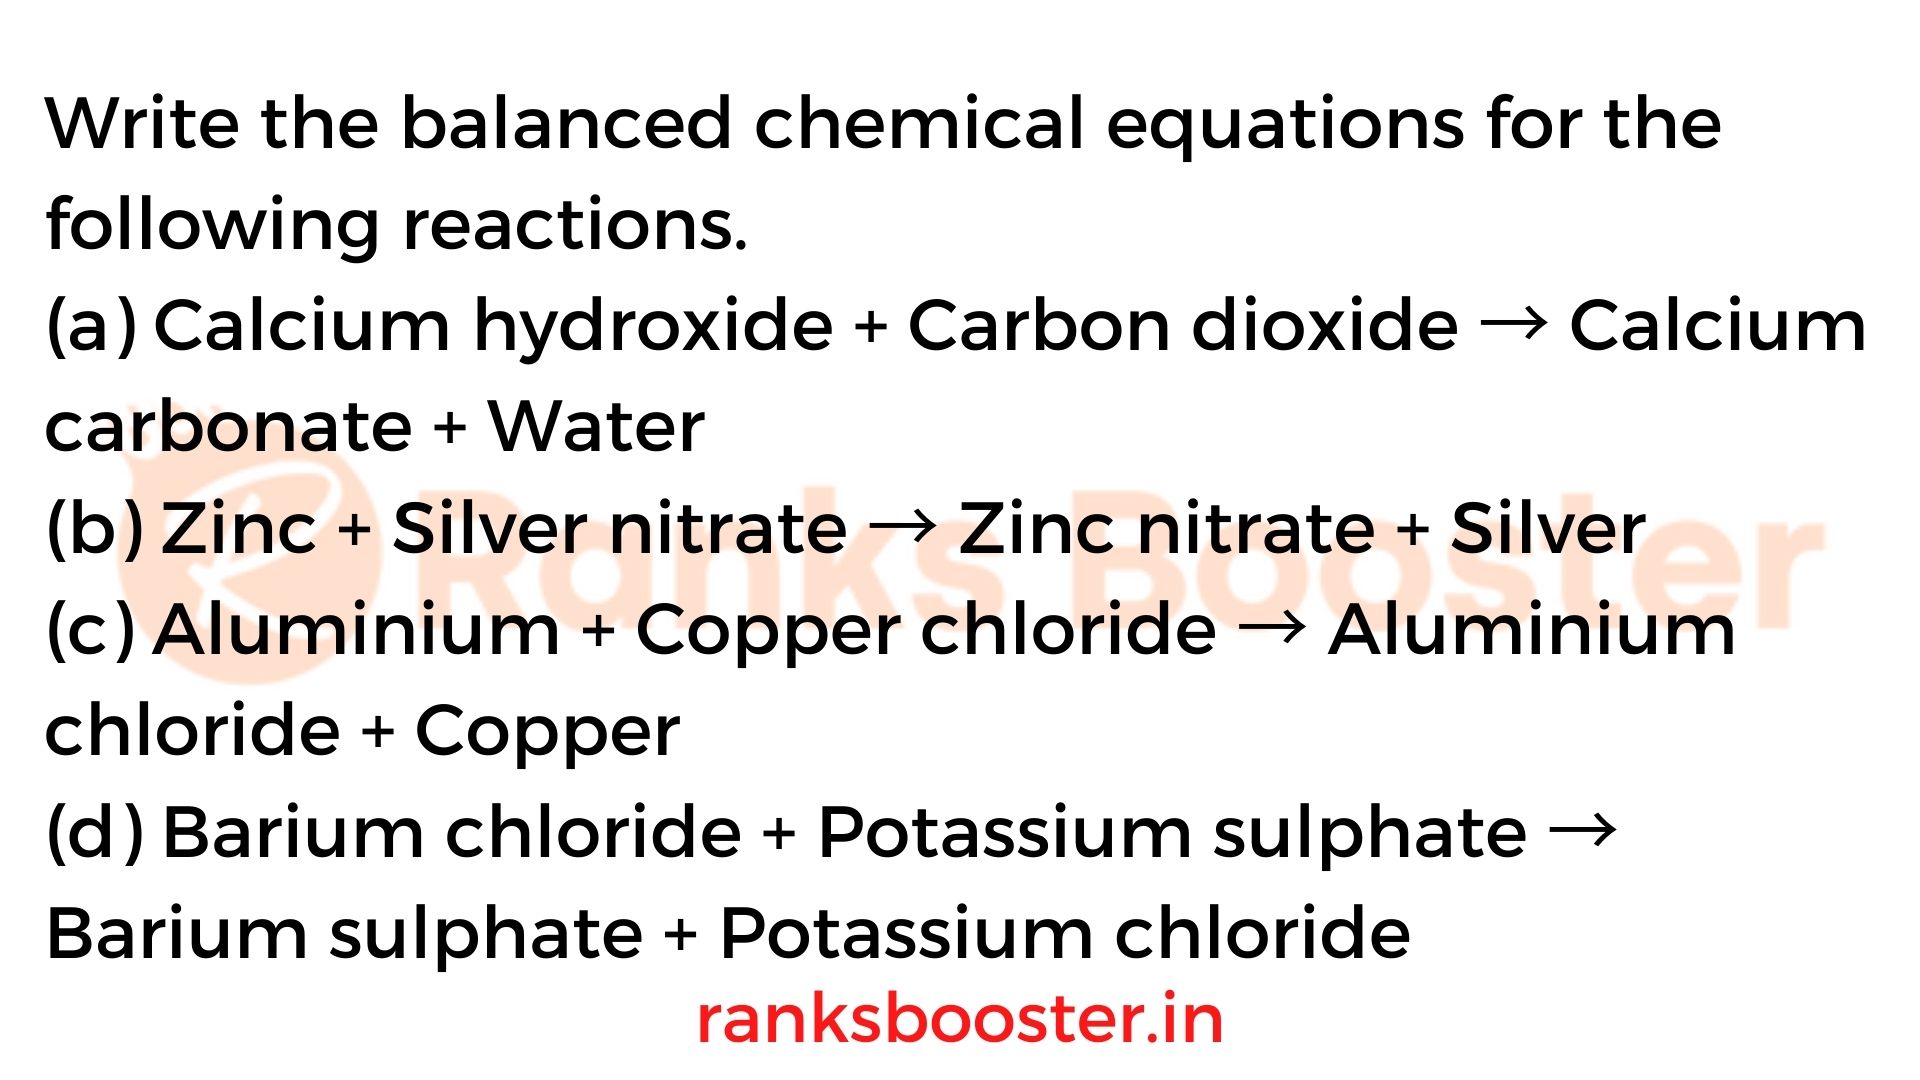 Write the balanced chemical equations for the following reactions